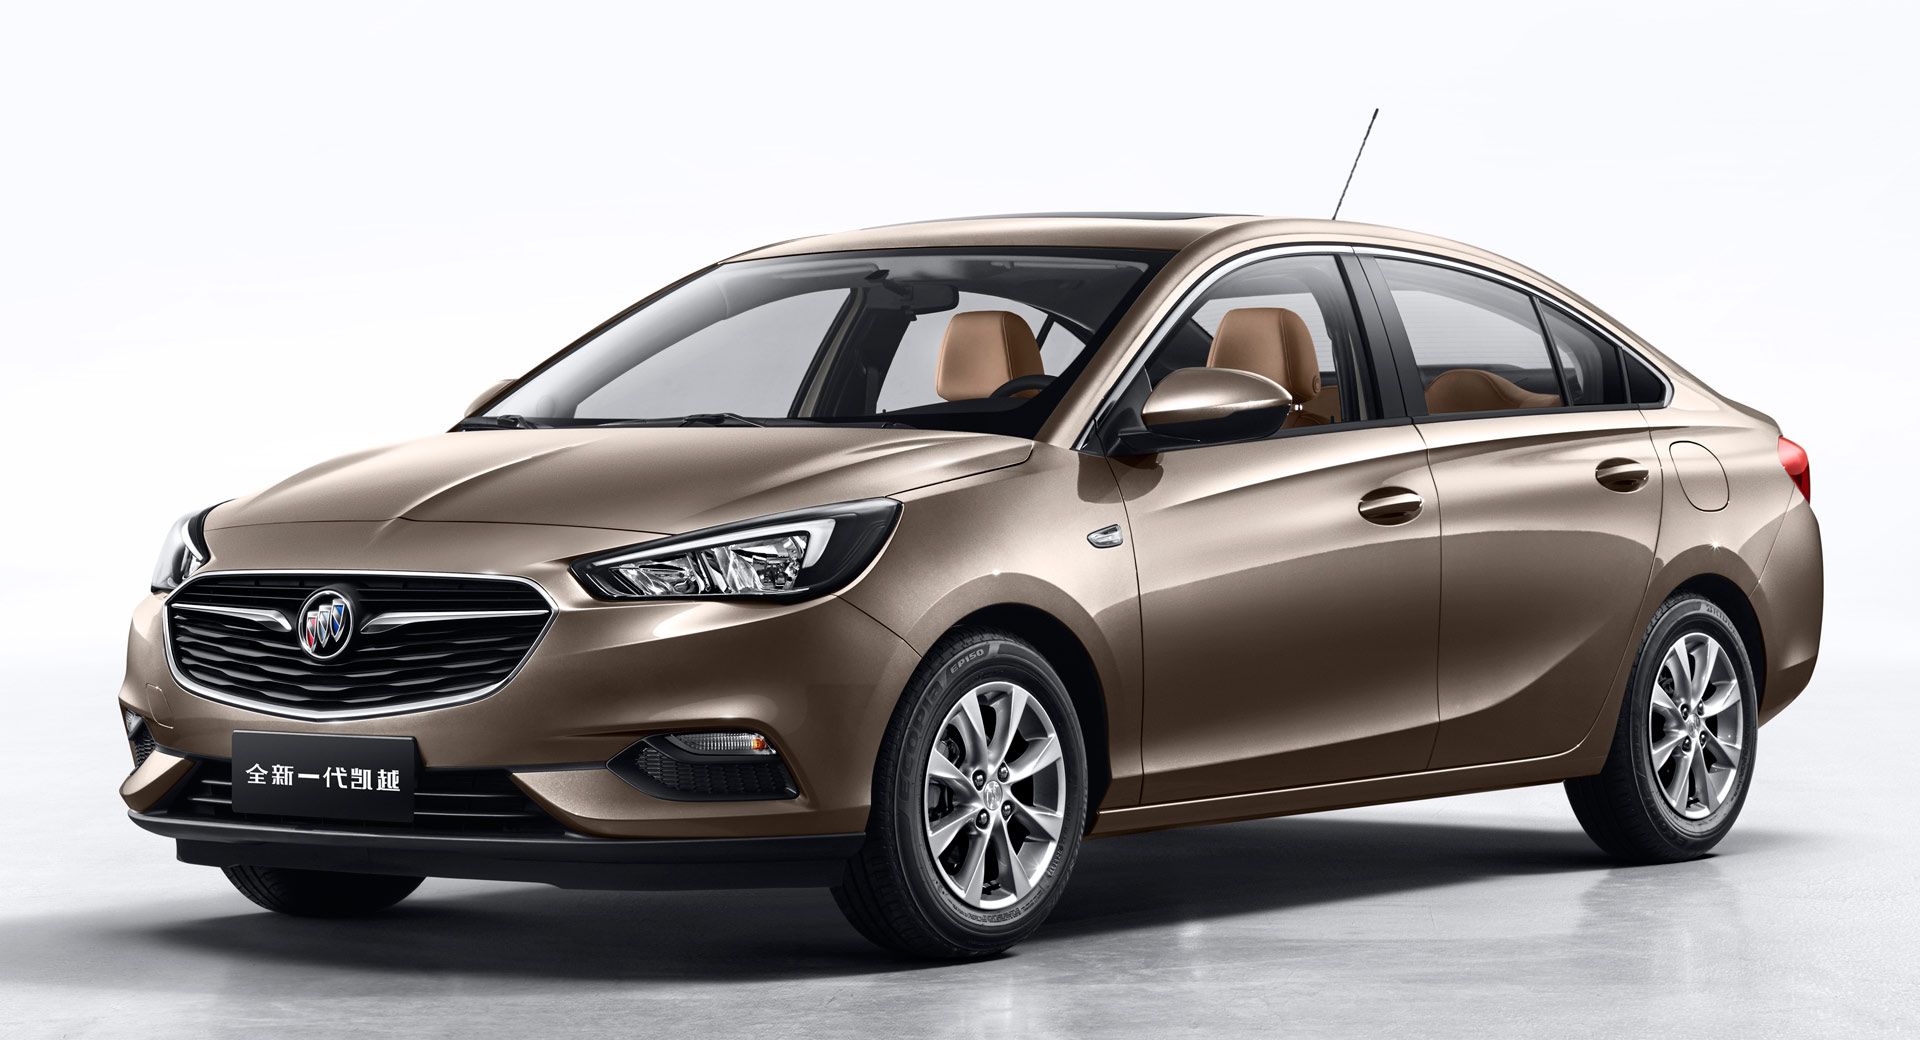 Buick Reveals A New Excelle Sedan Just For China | Carscoops